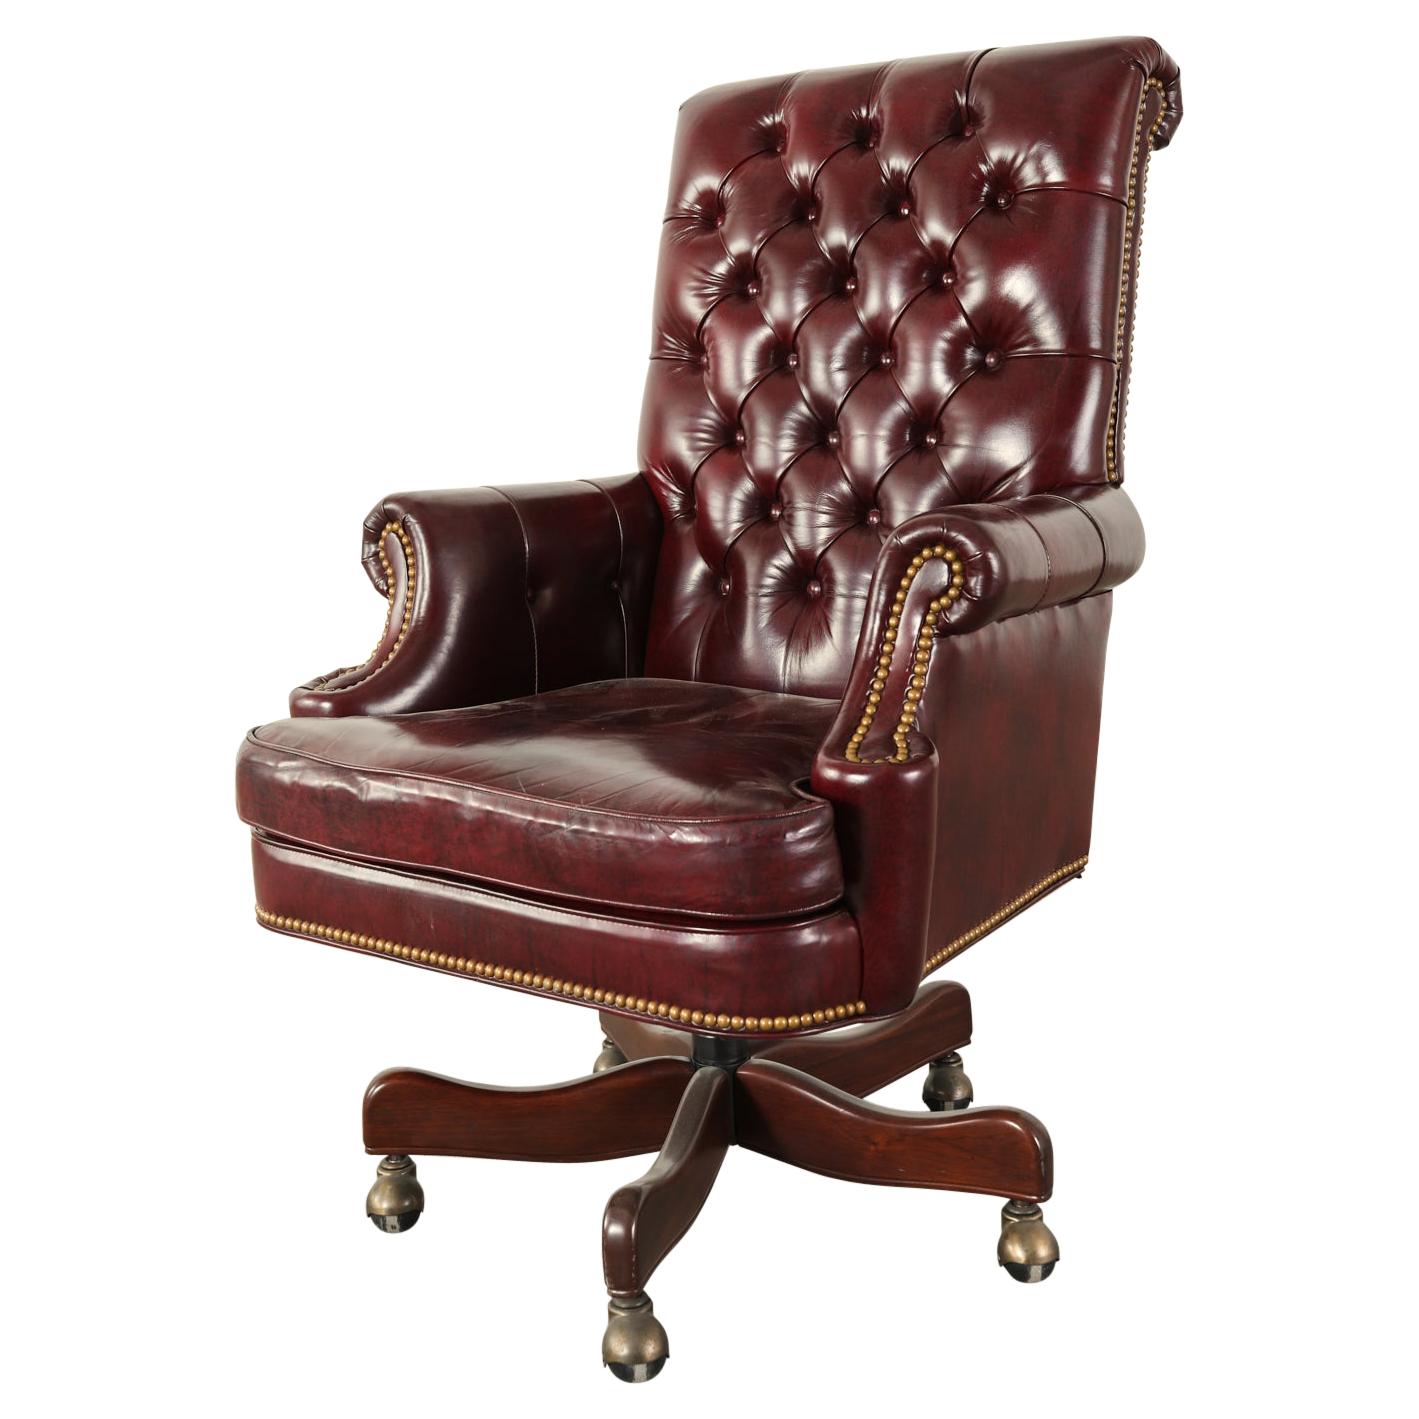 English Chesterfield Style Tufted Leather Executive Desk Chair